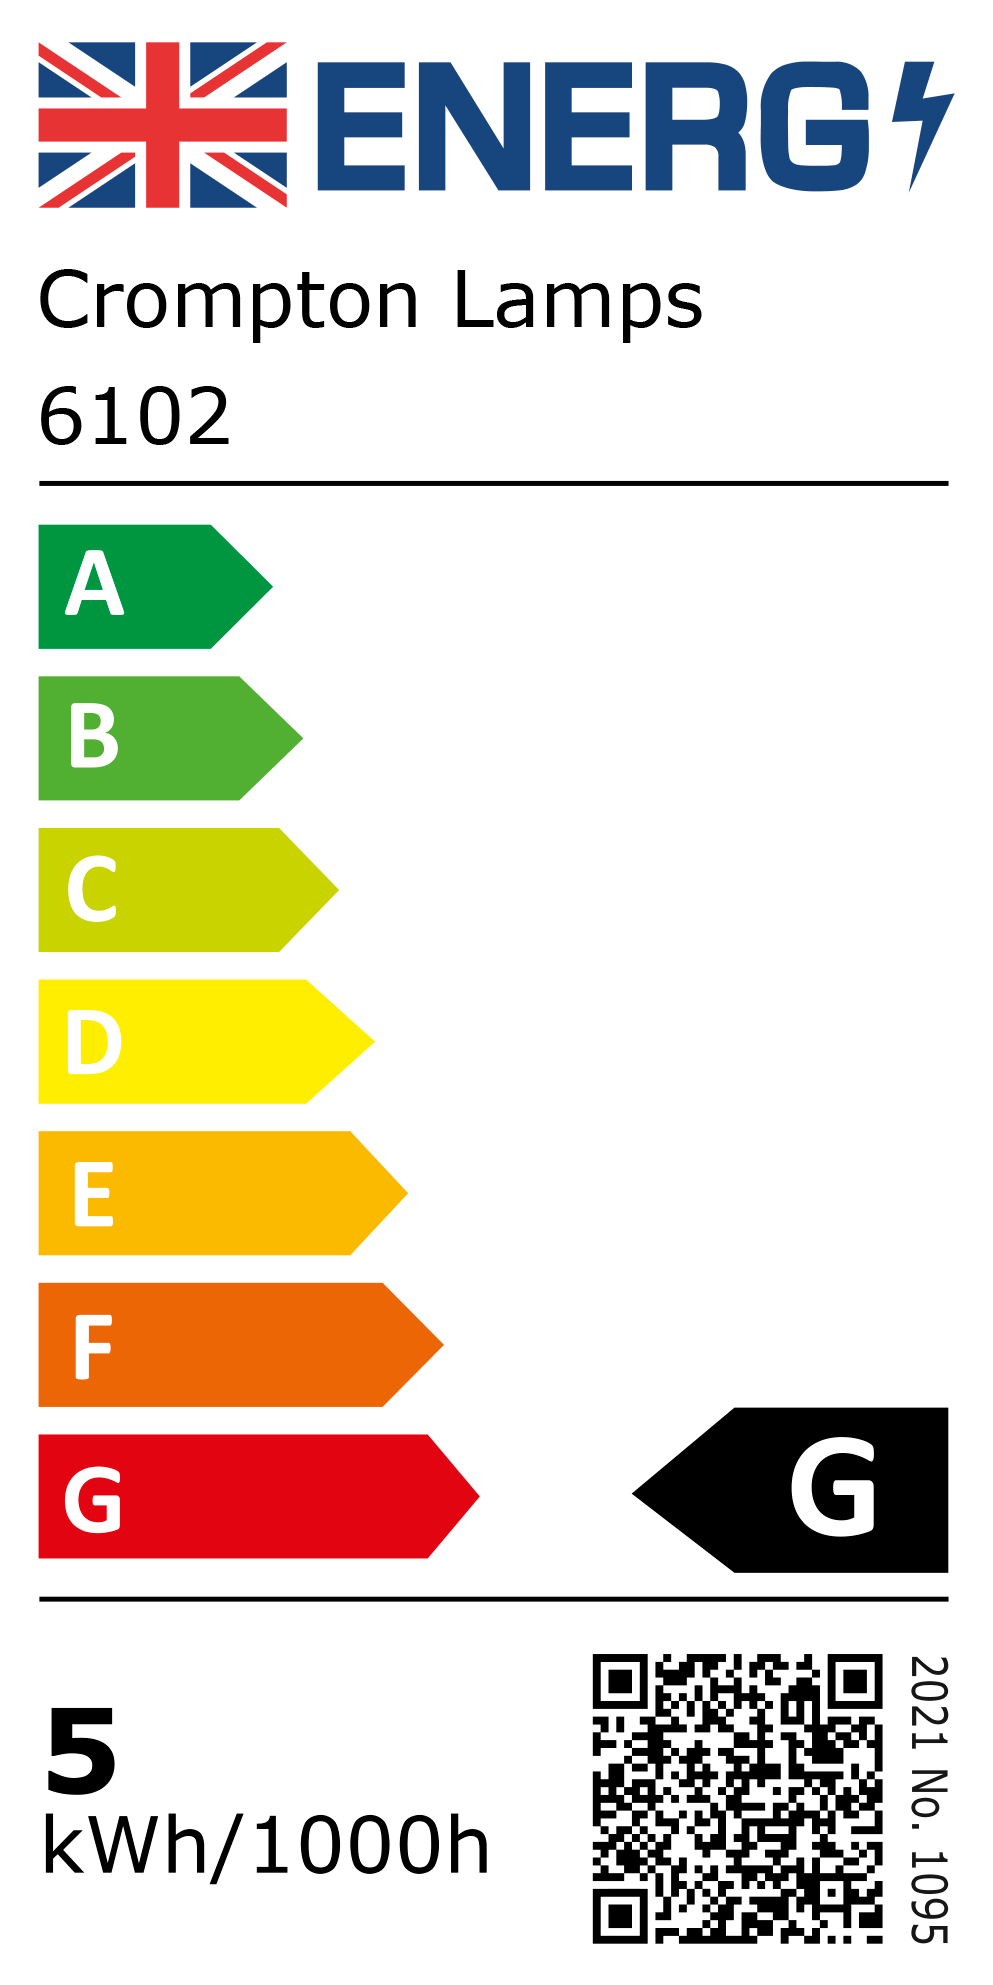 New 2021 Energy Rating Label: Stock Code 6102